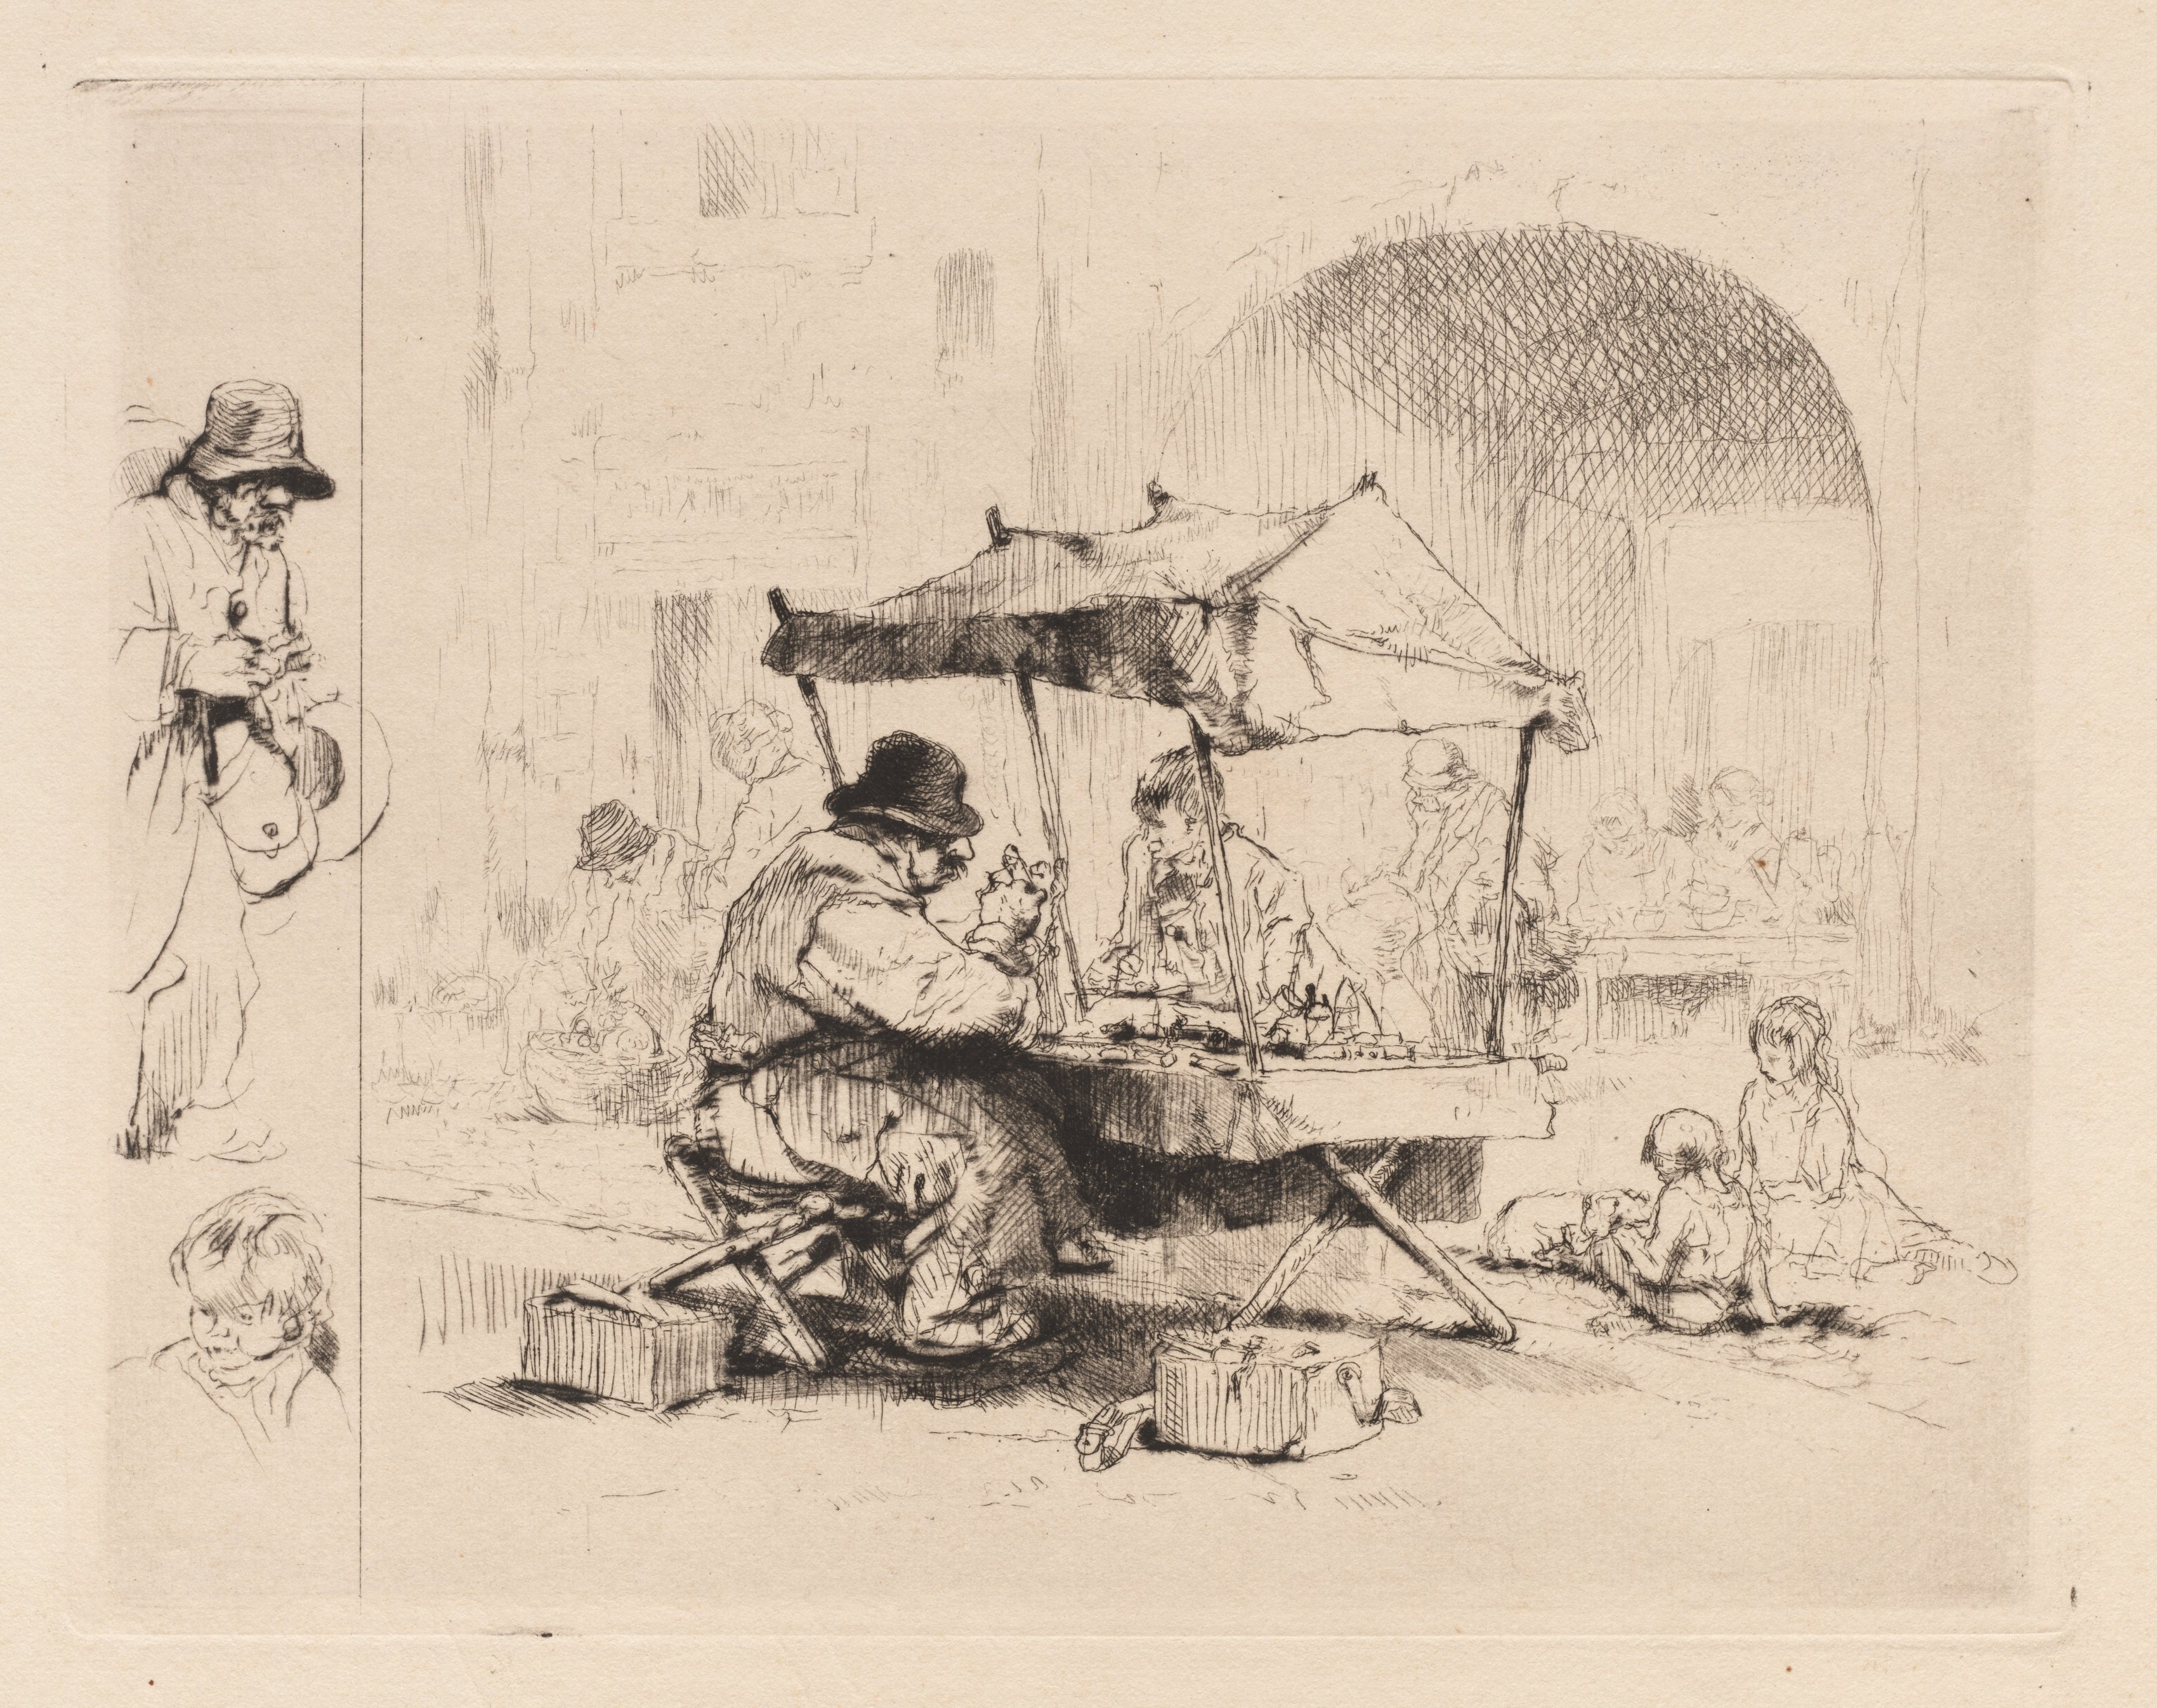 [Merchant in his stall with children playing]